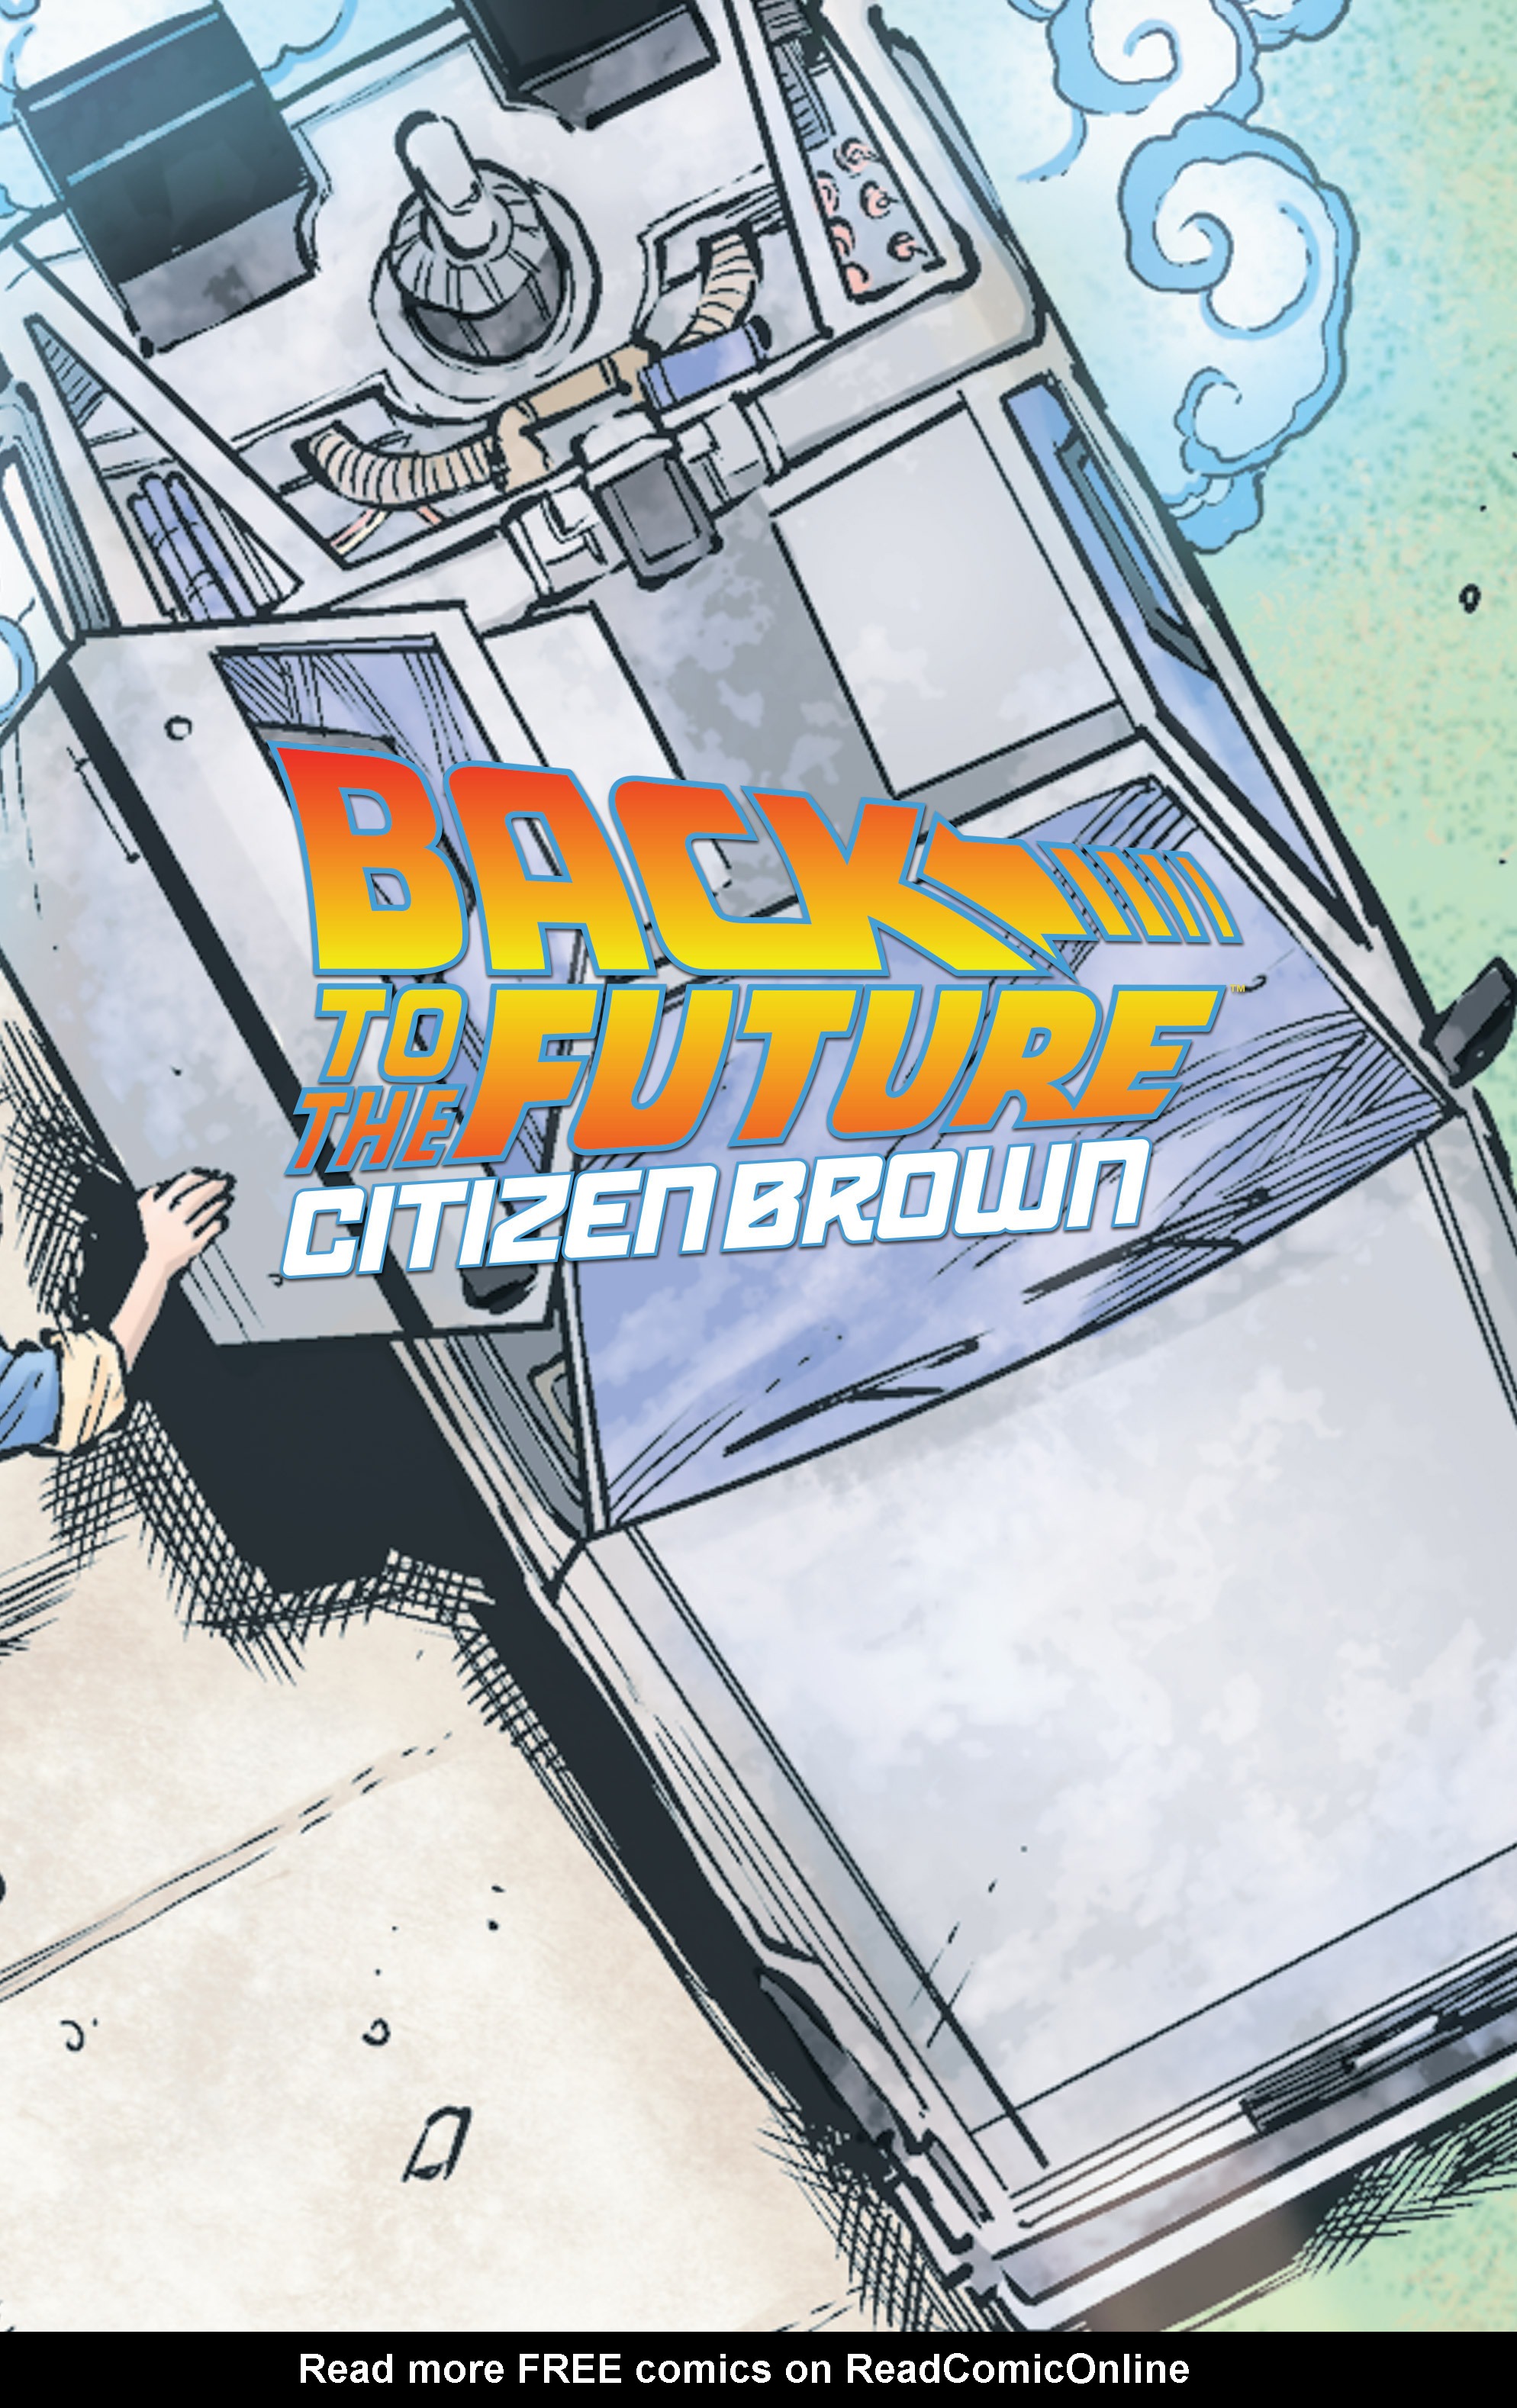 Read online Back to the Future: Citizen Brown comic -  Issue #5 - 4